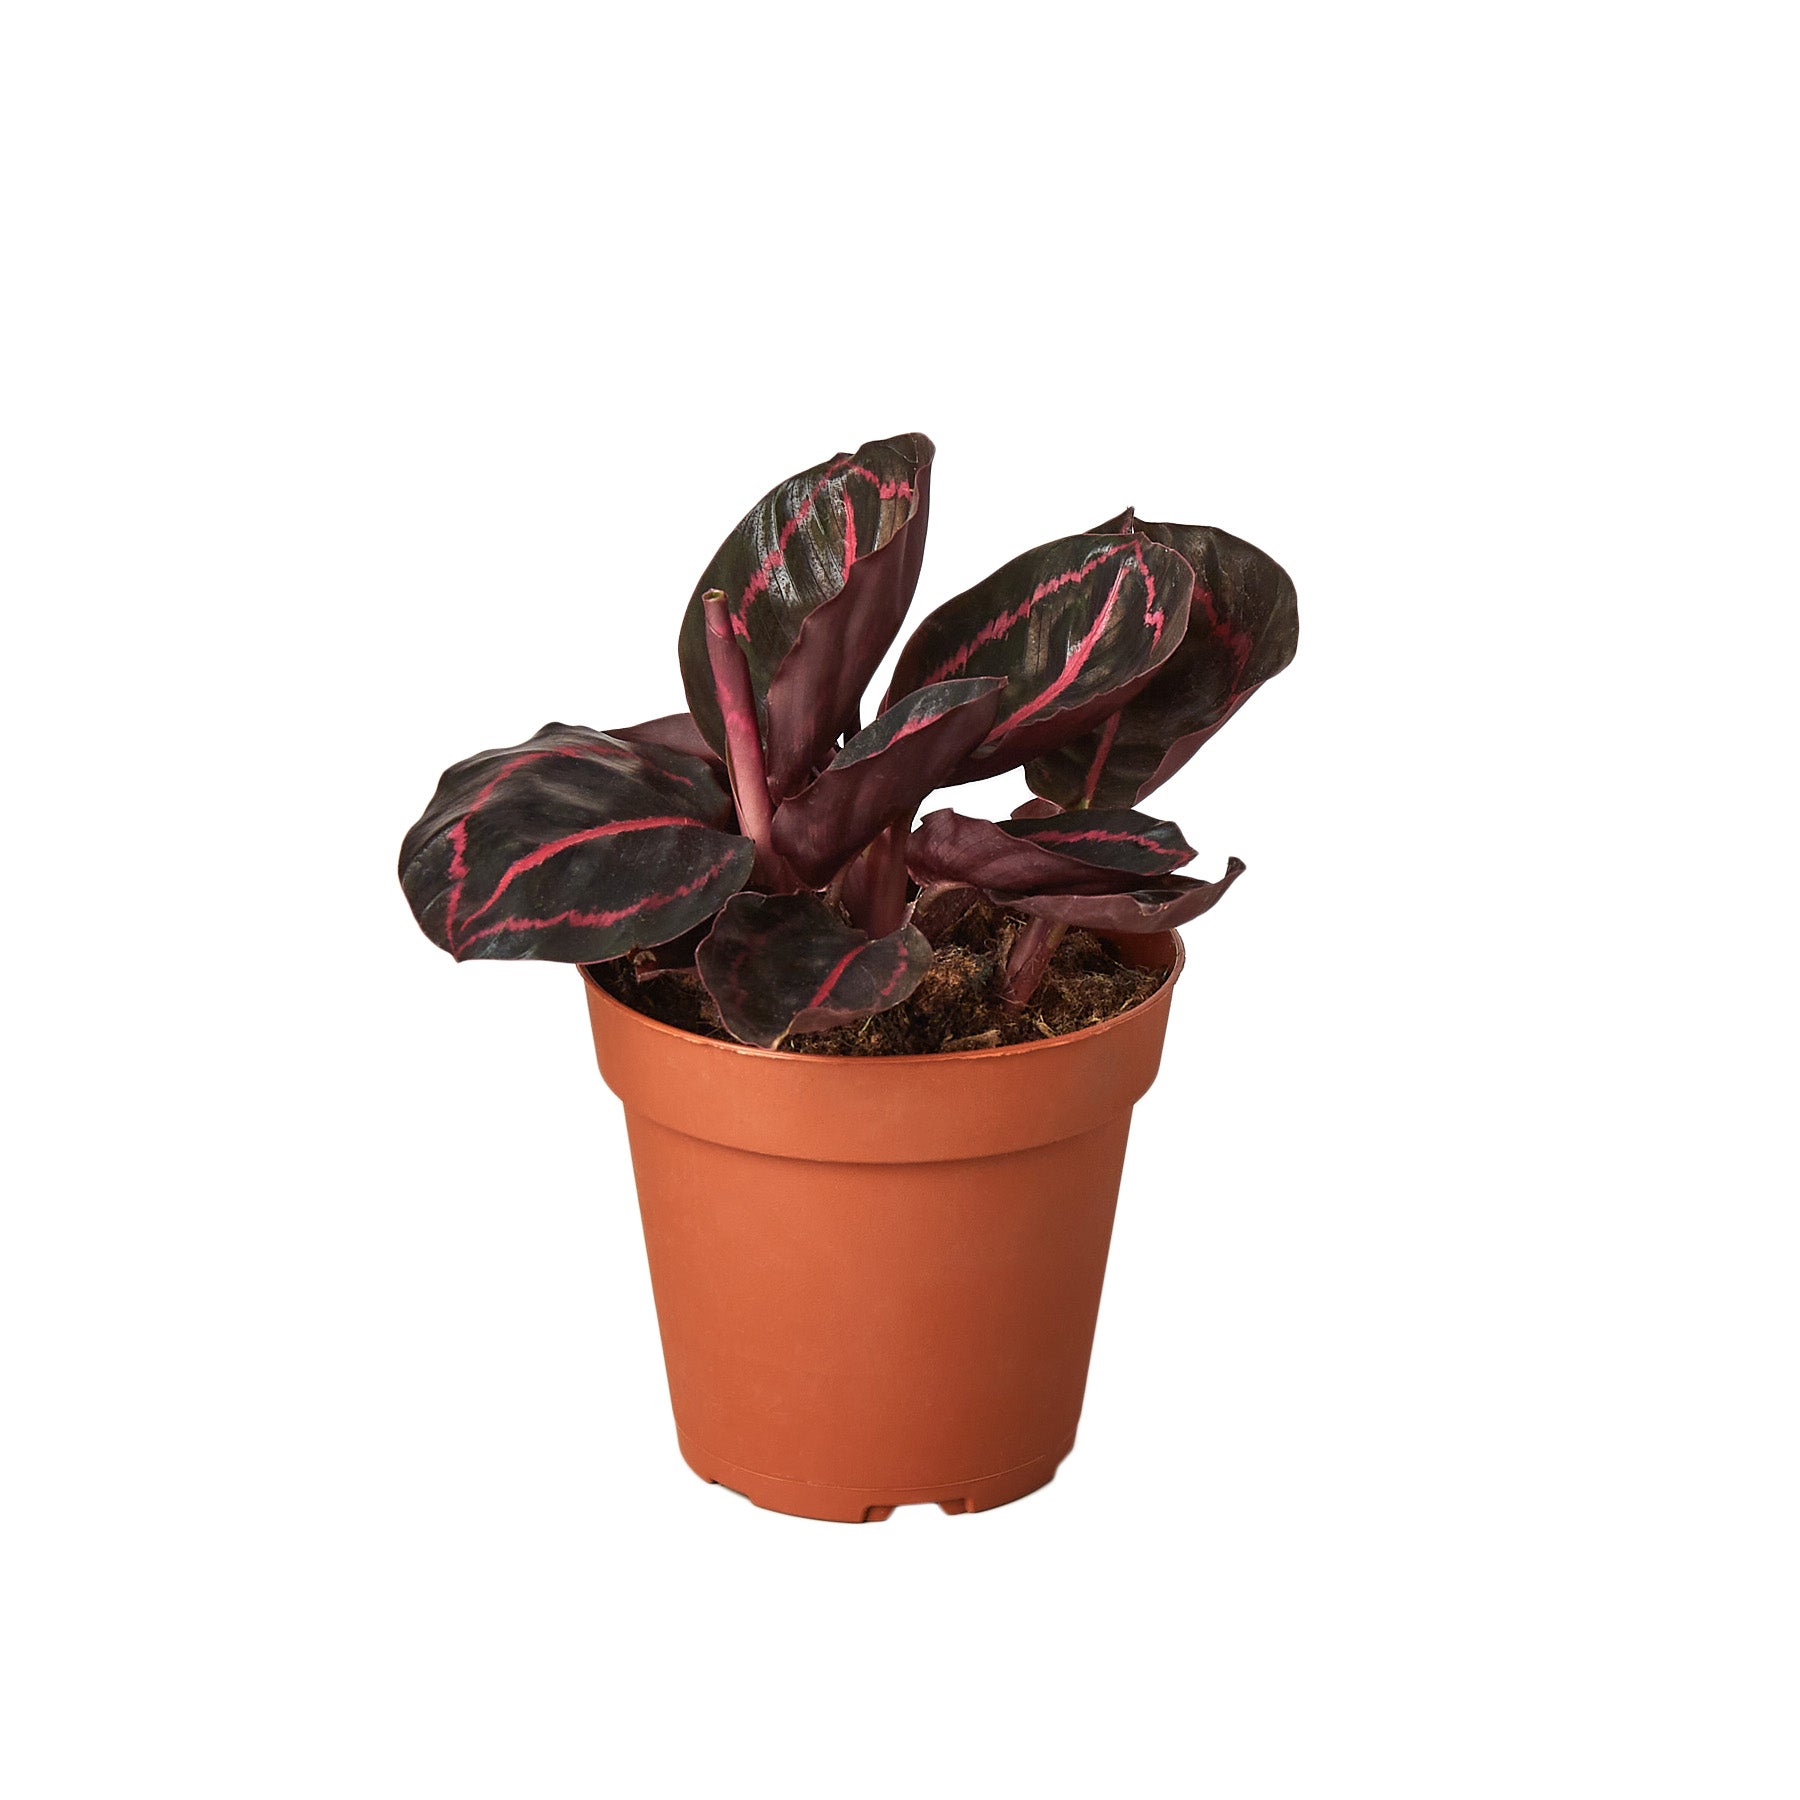 A small potted plant with red and black leaves available at top plant nurseries near me.